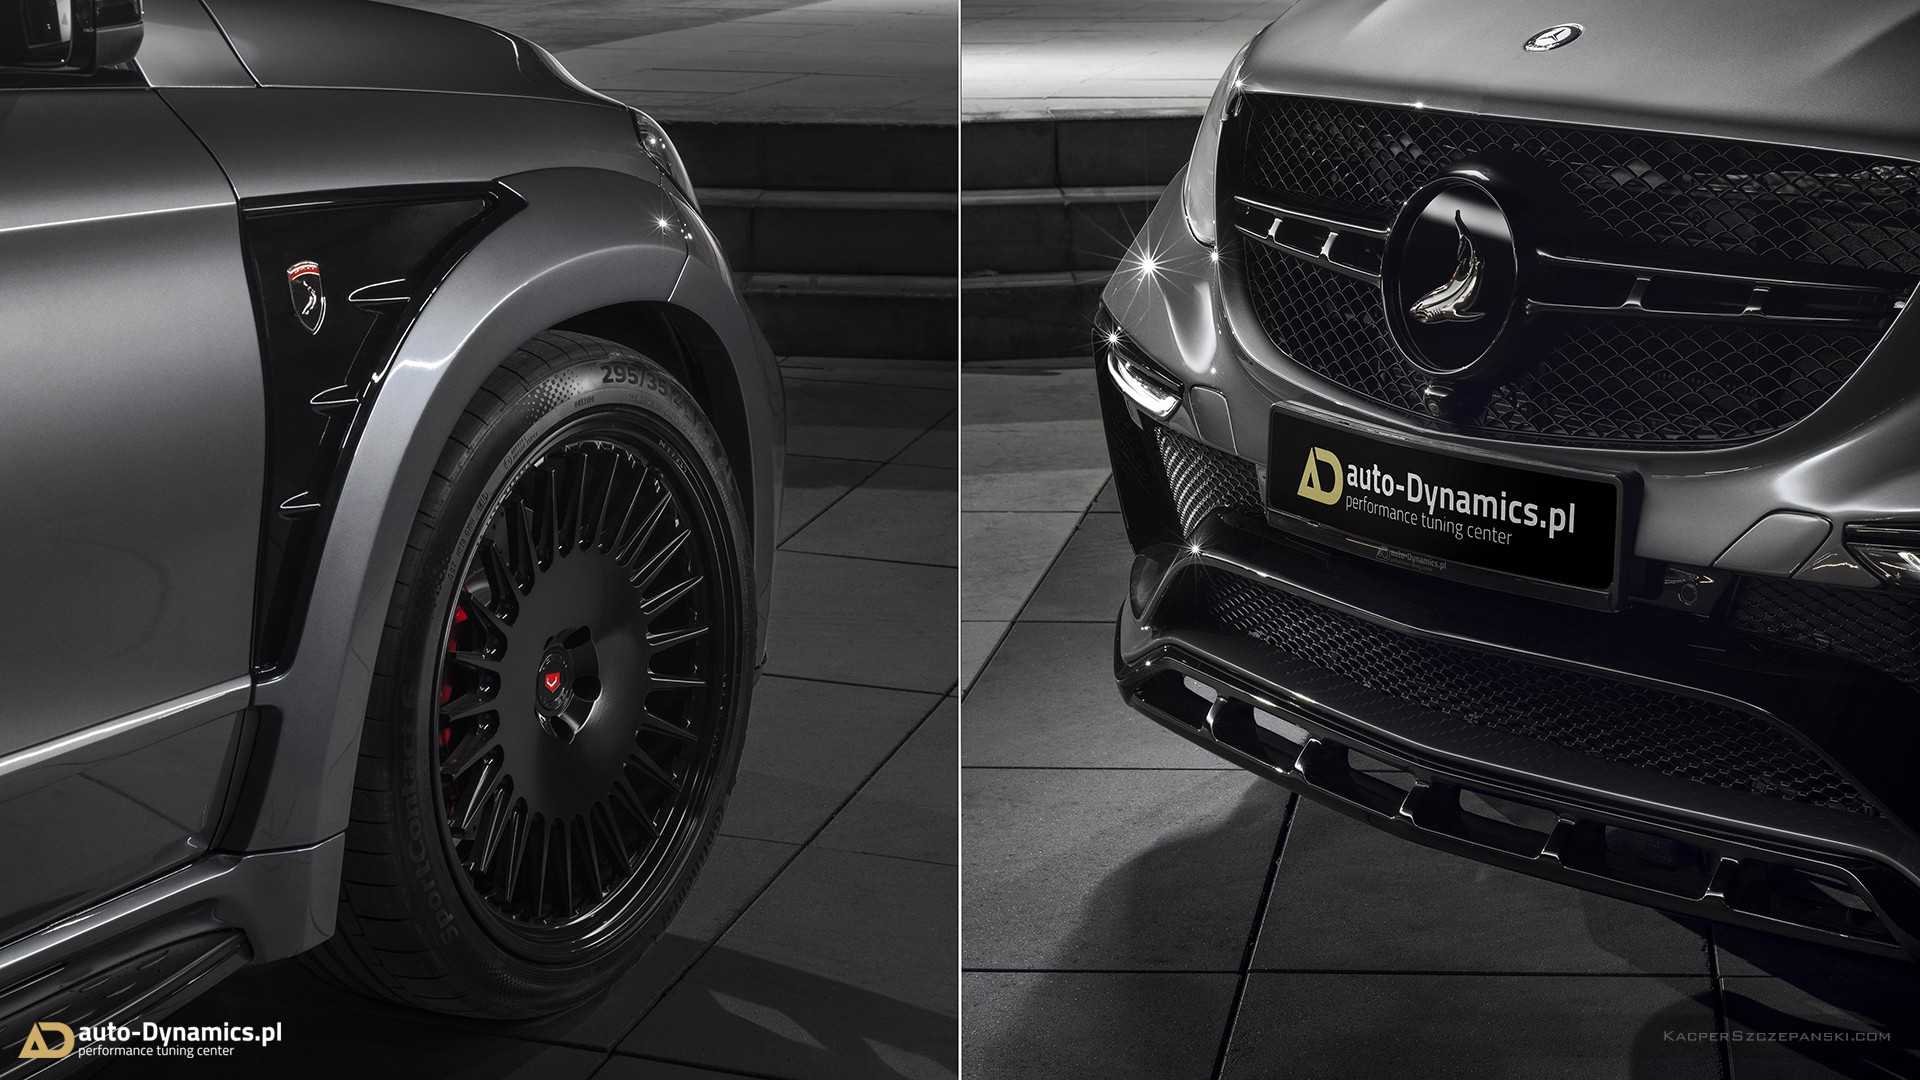 Mercedes-Benz GLE63 S AMG Inferno by auto-Dynamics.pl